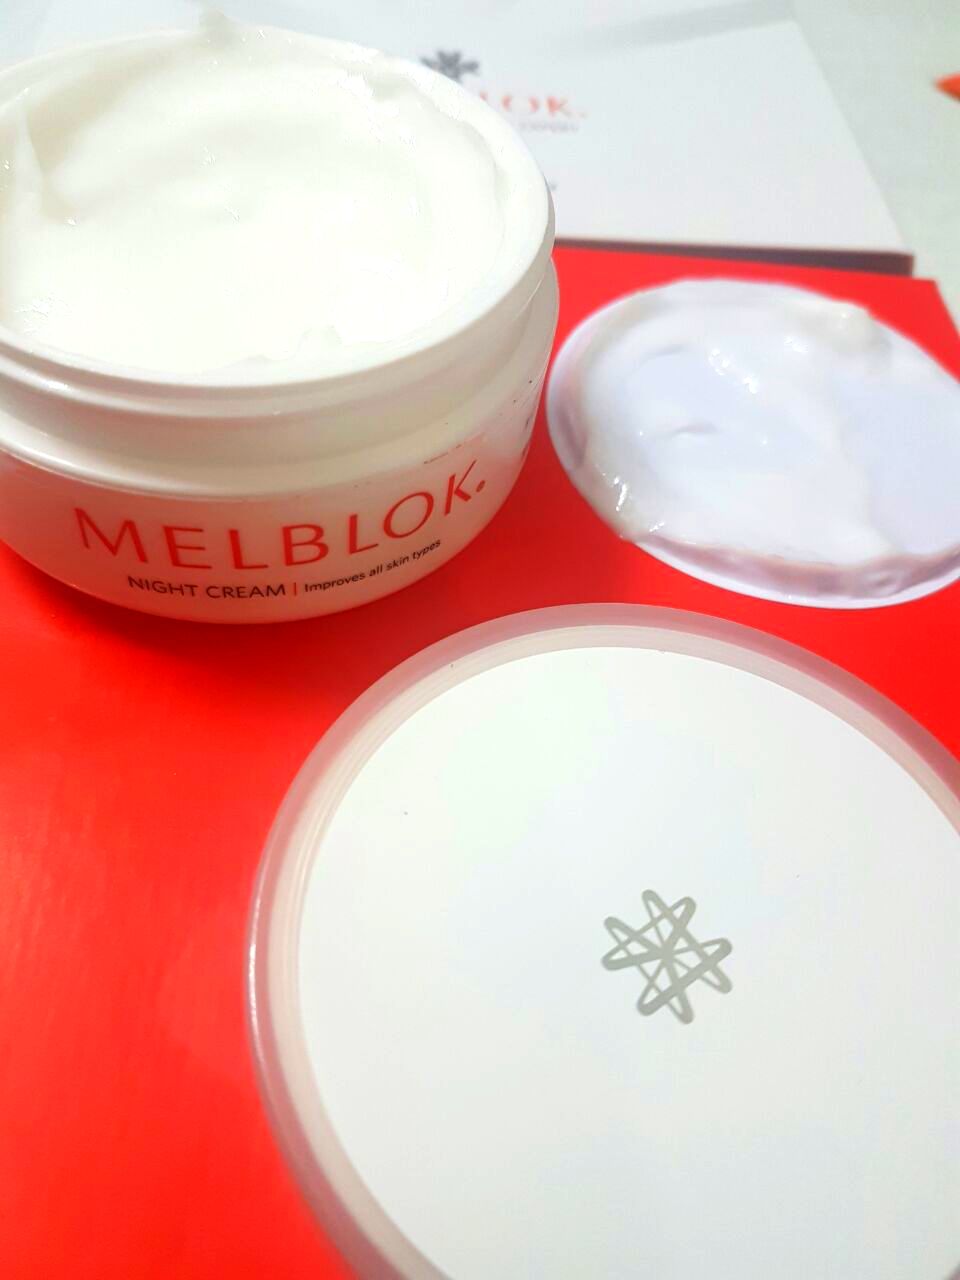 melblok-advance-home-kit-and-pure-face-wash